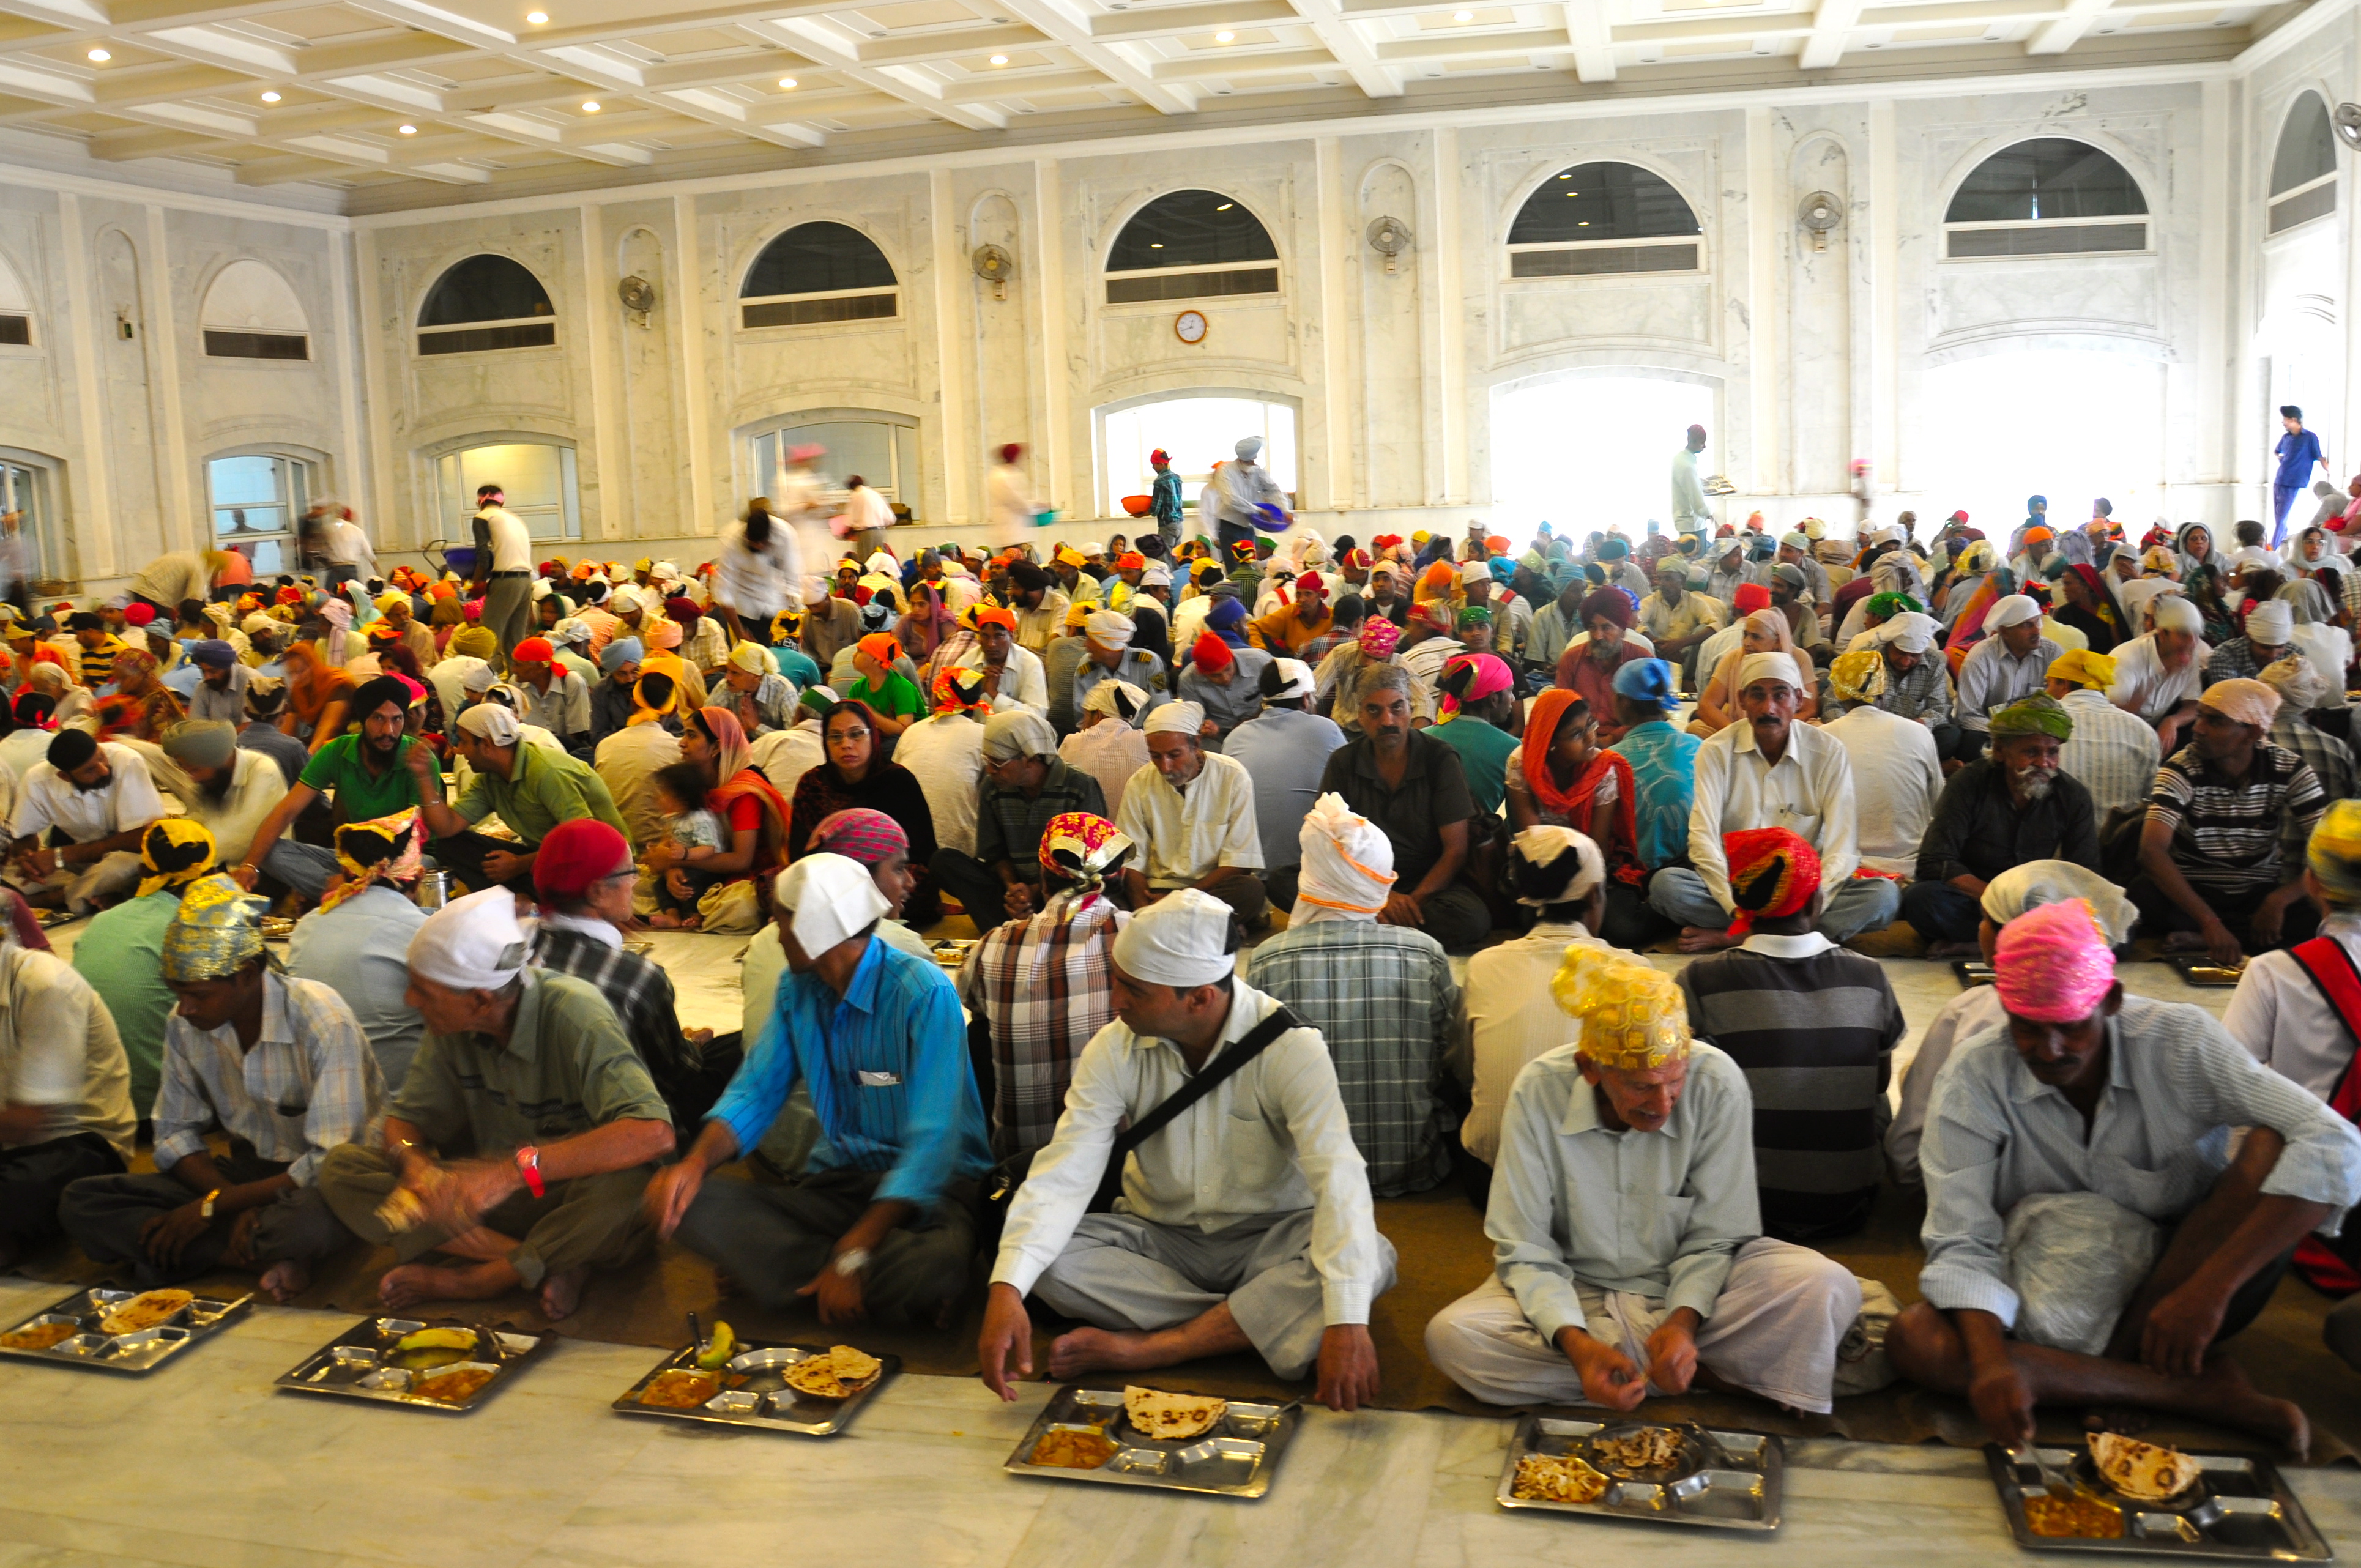 Thousands of individuals sitting together to have the ultimate Langar feast